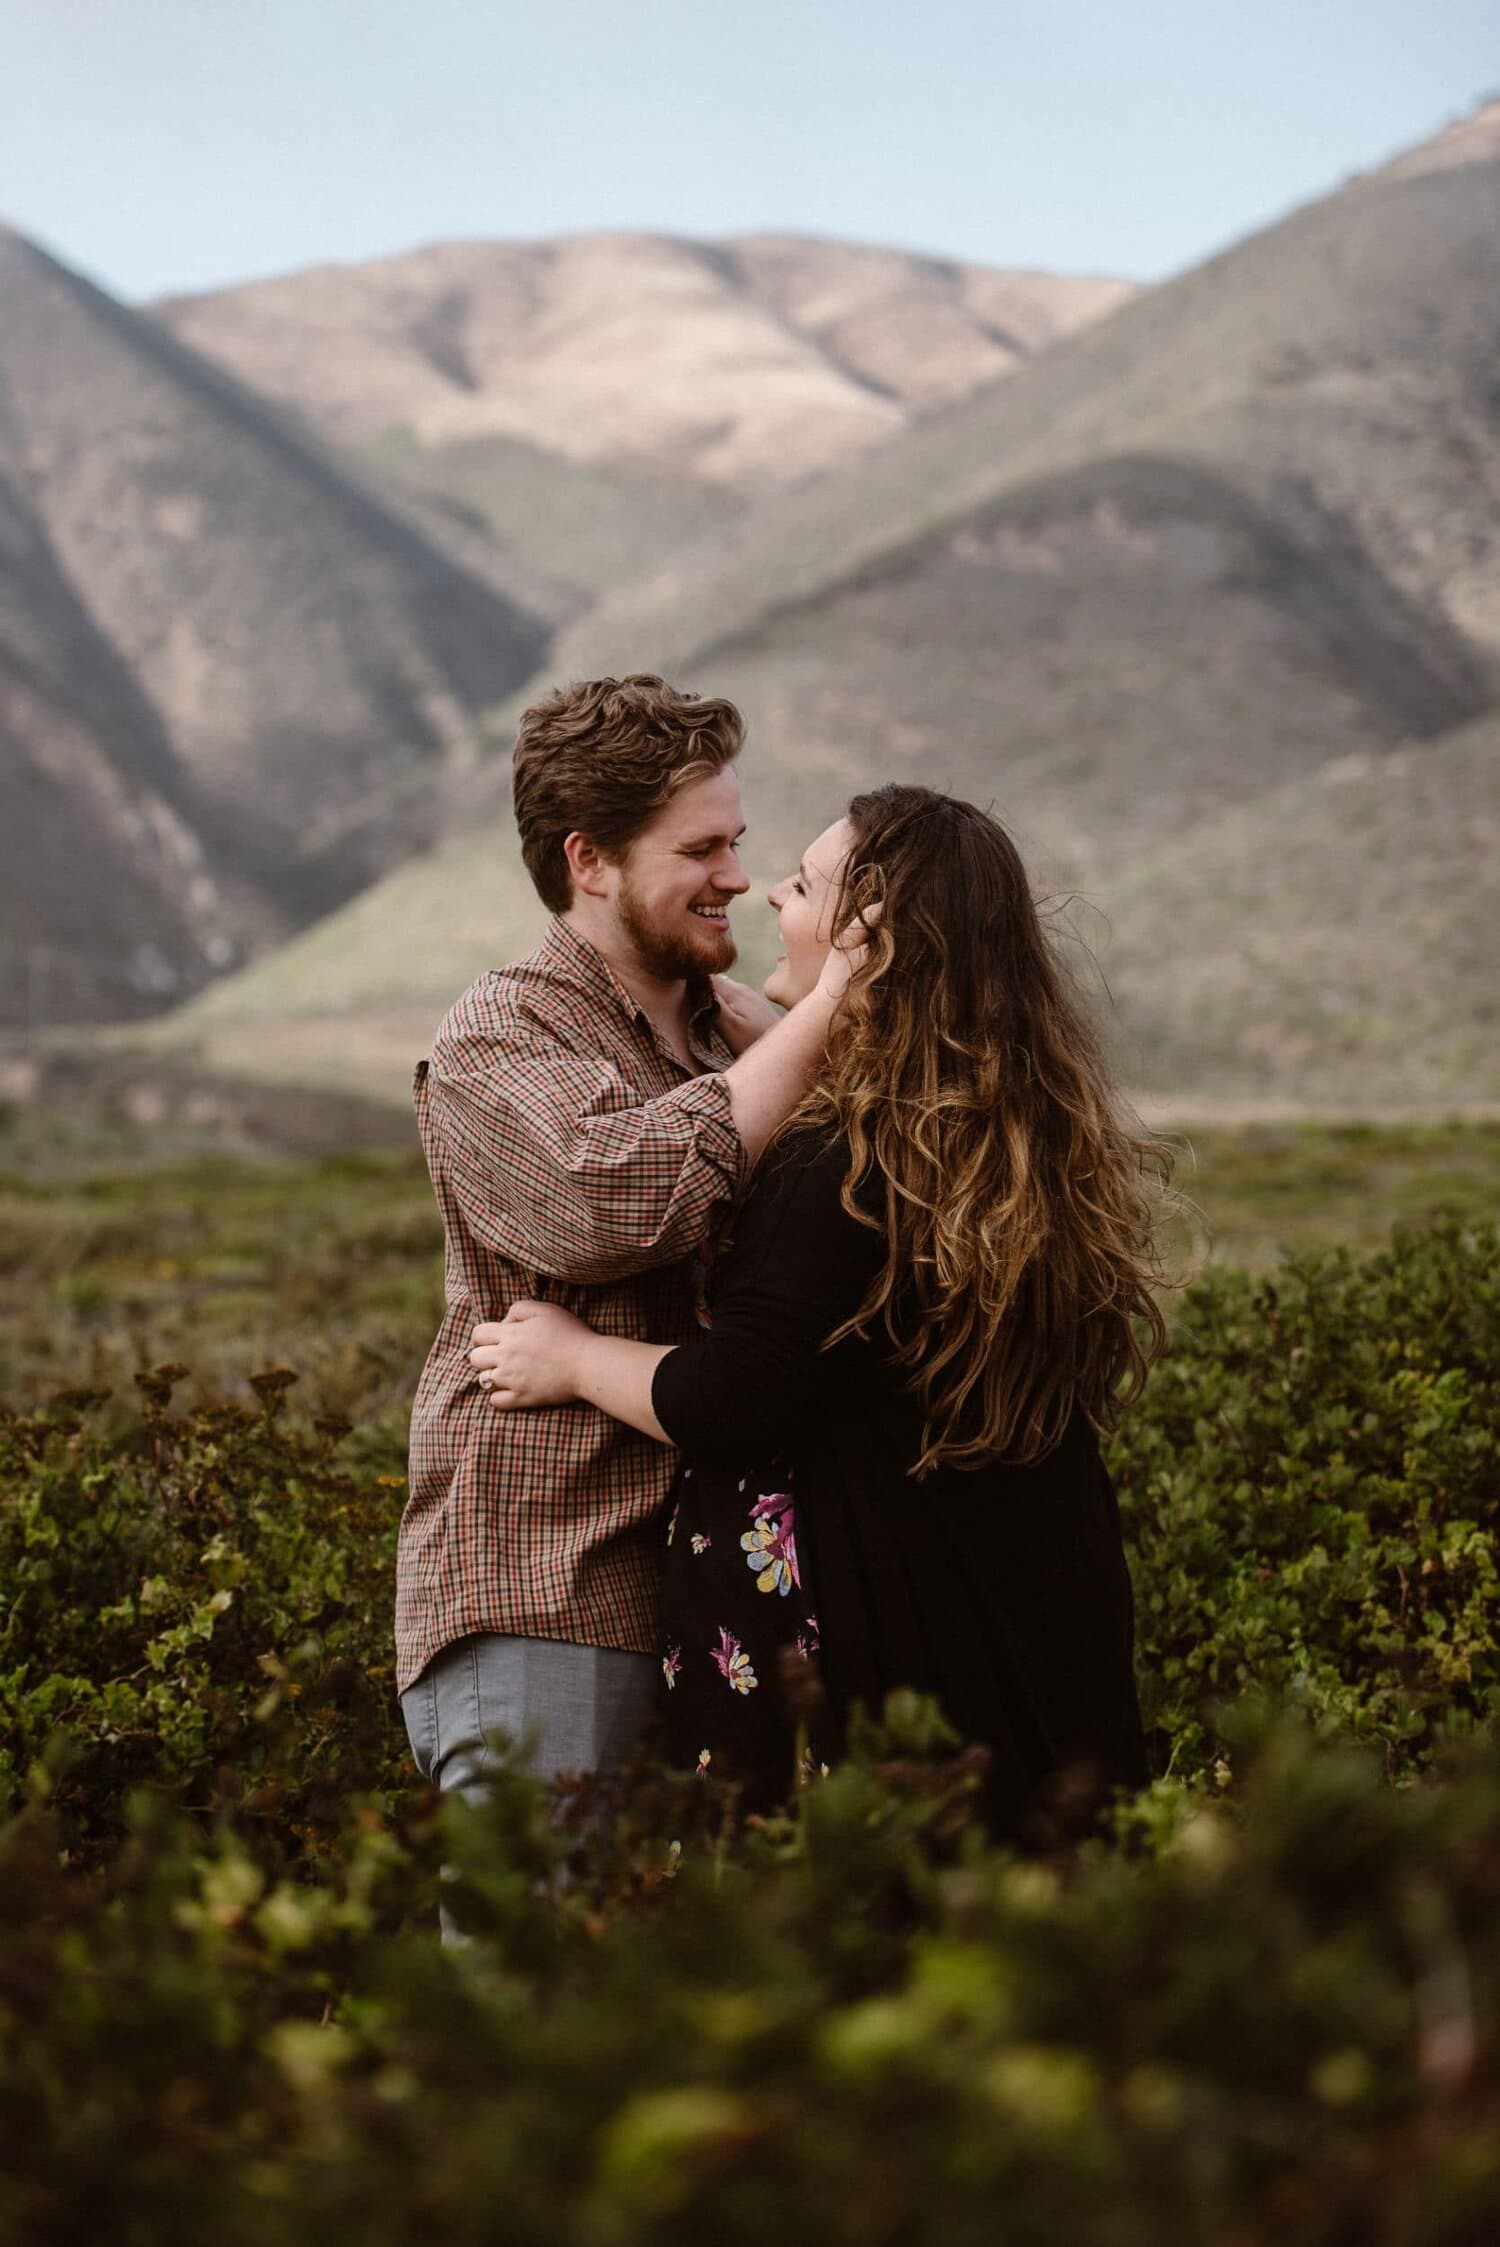 Bride and groom embrace and smile at each other on their elopement day in Big Sur, California.